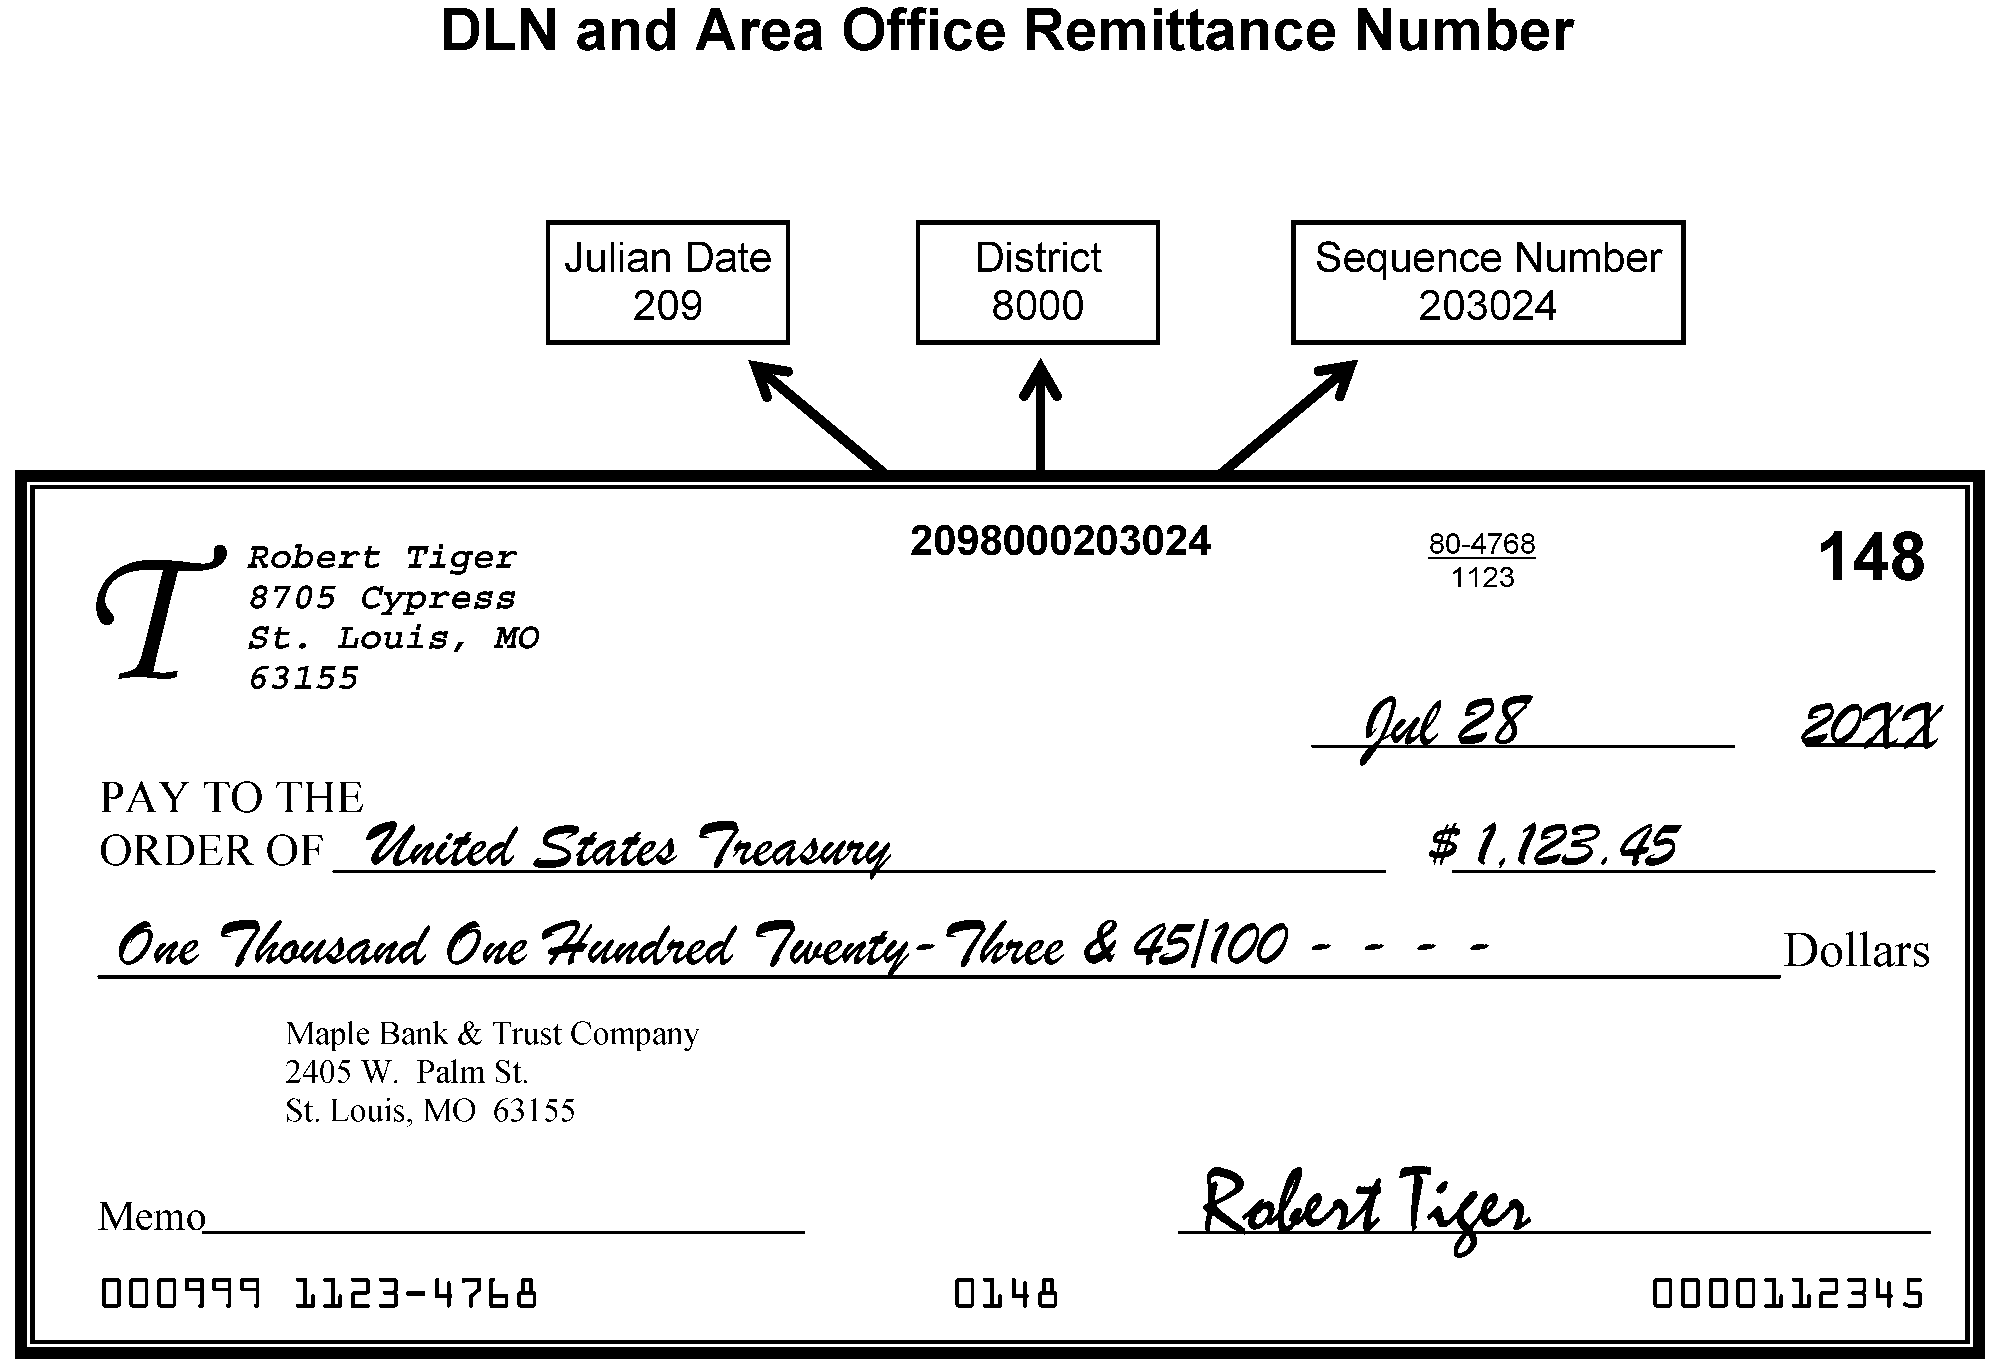 23.23.23 Dishonored Check File (DCF) and Unidentified Remittance